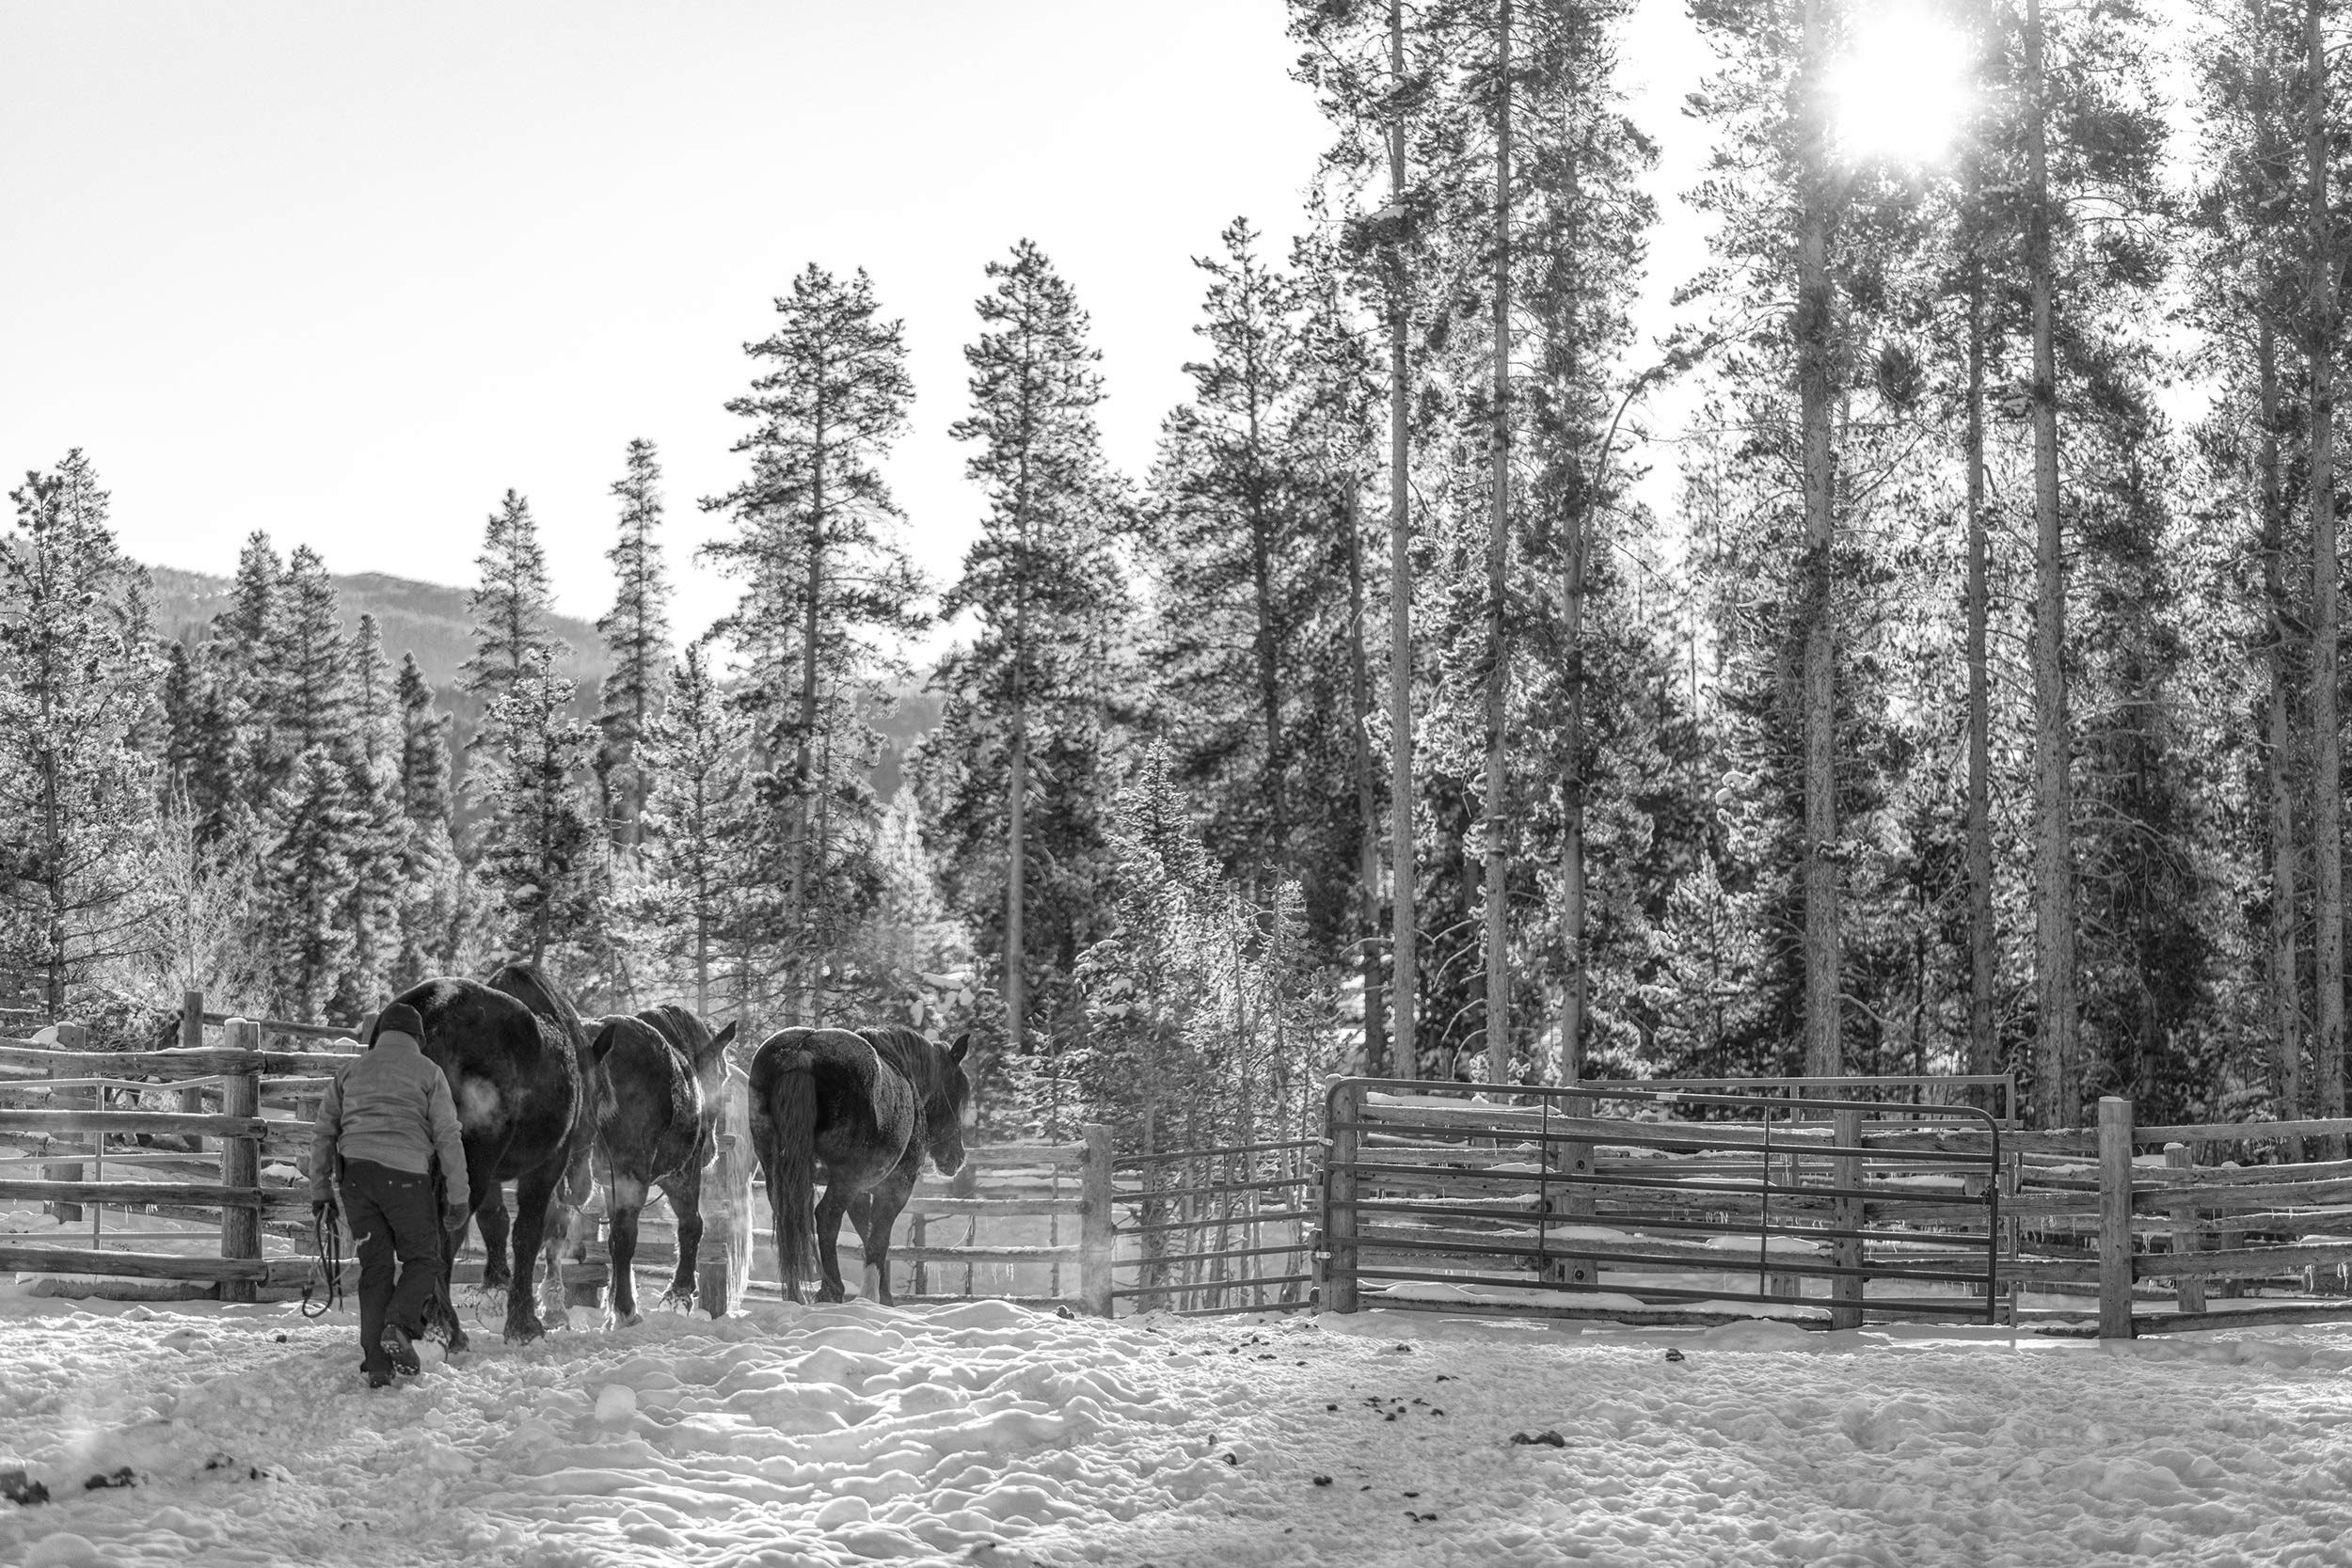 Morning round up of horses for feeding. Livestock and agriculture photography